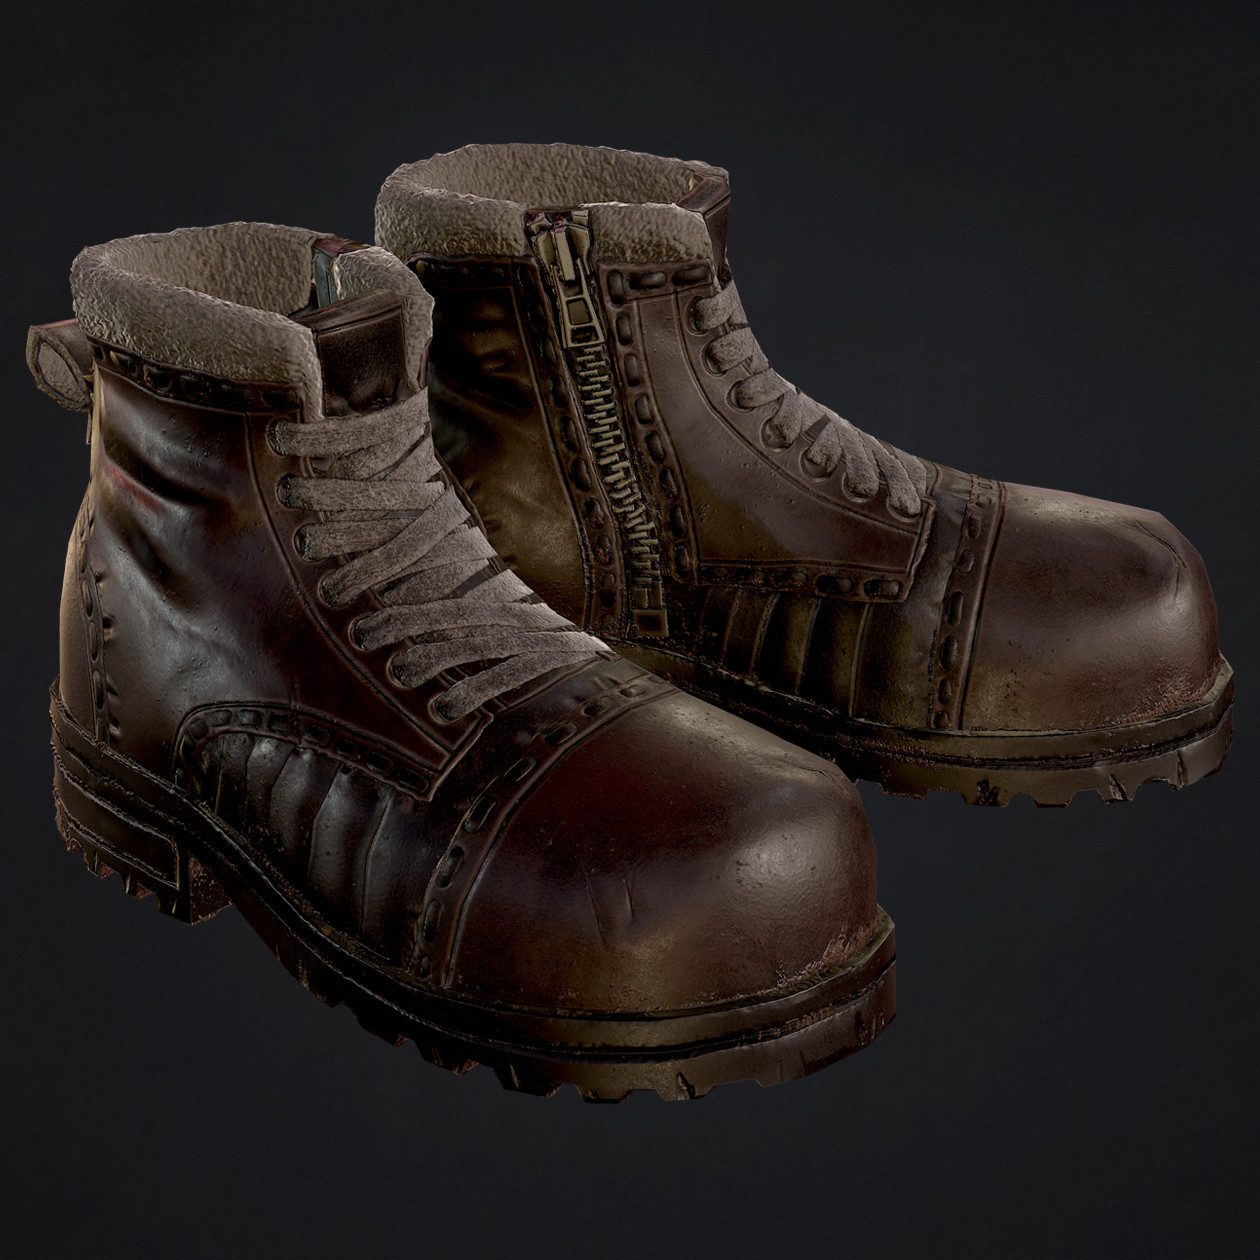 Mateo Costa - Art/Creative Director and 3D Artist - Leather boots